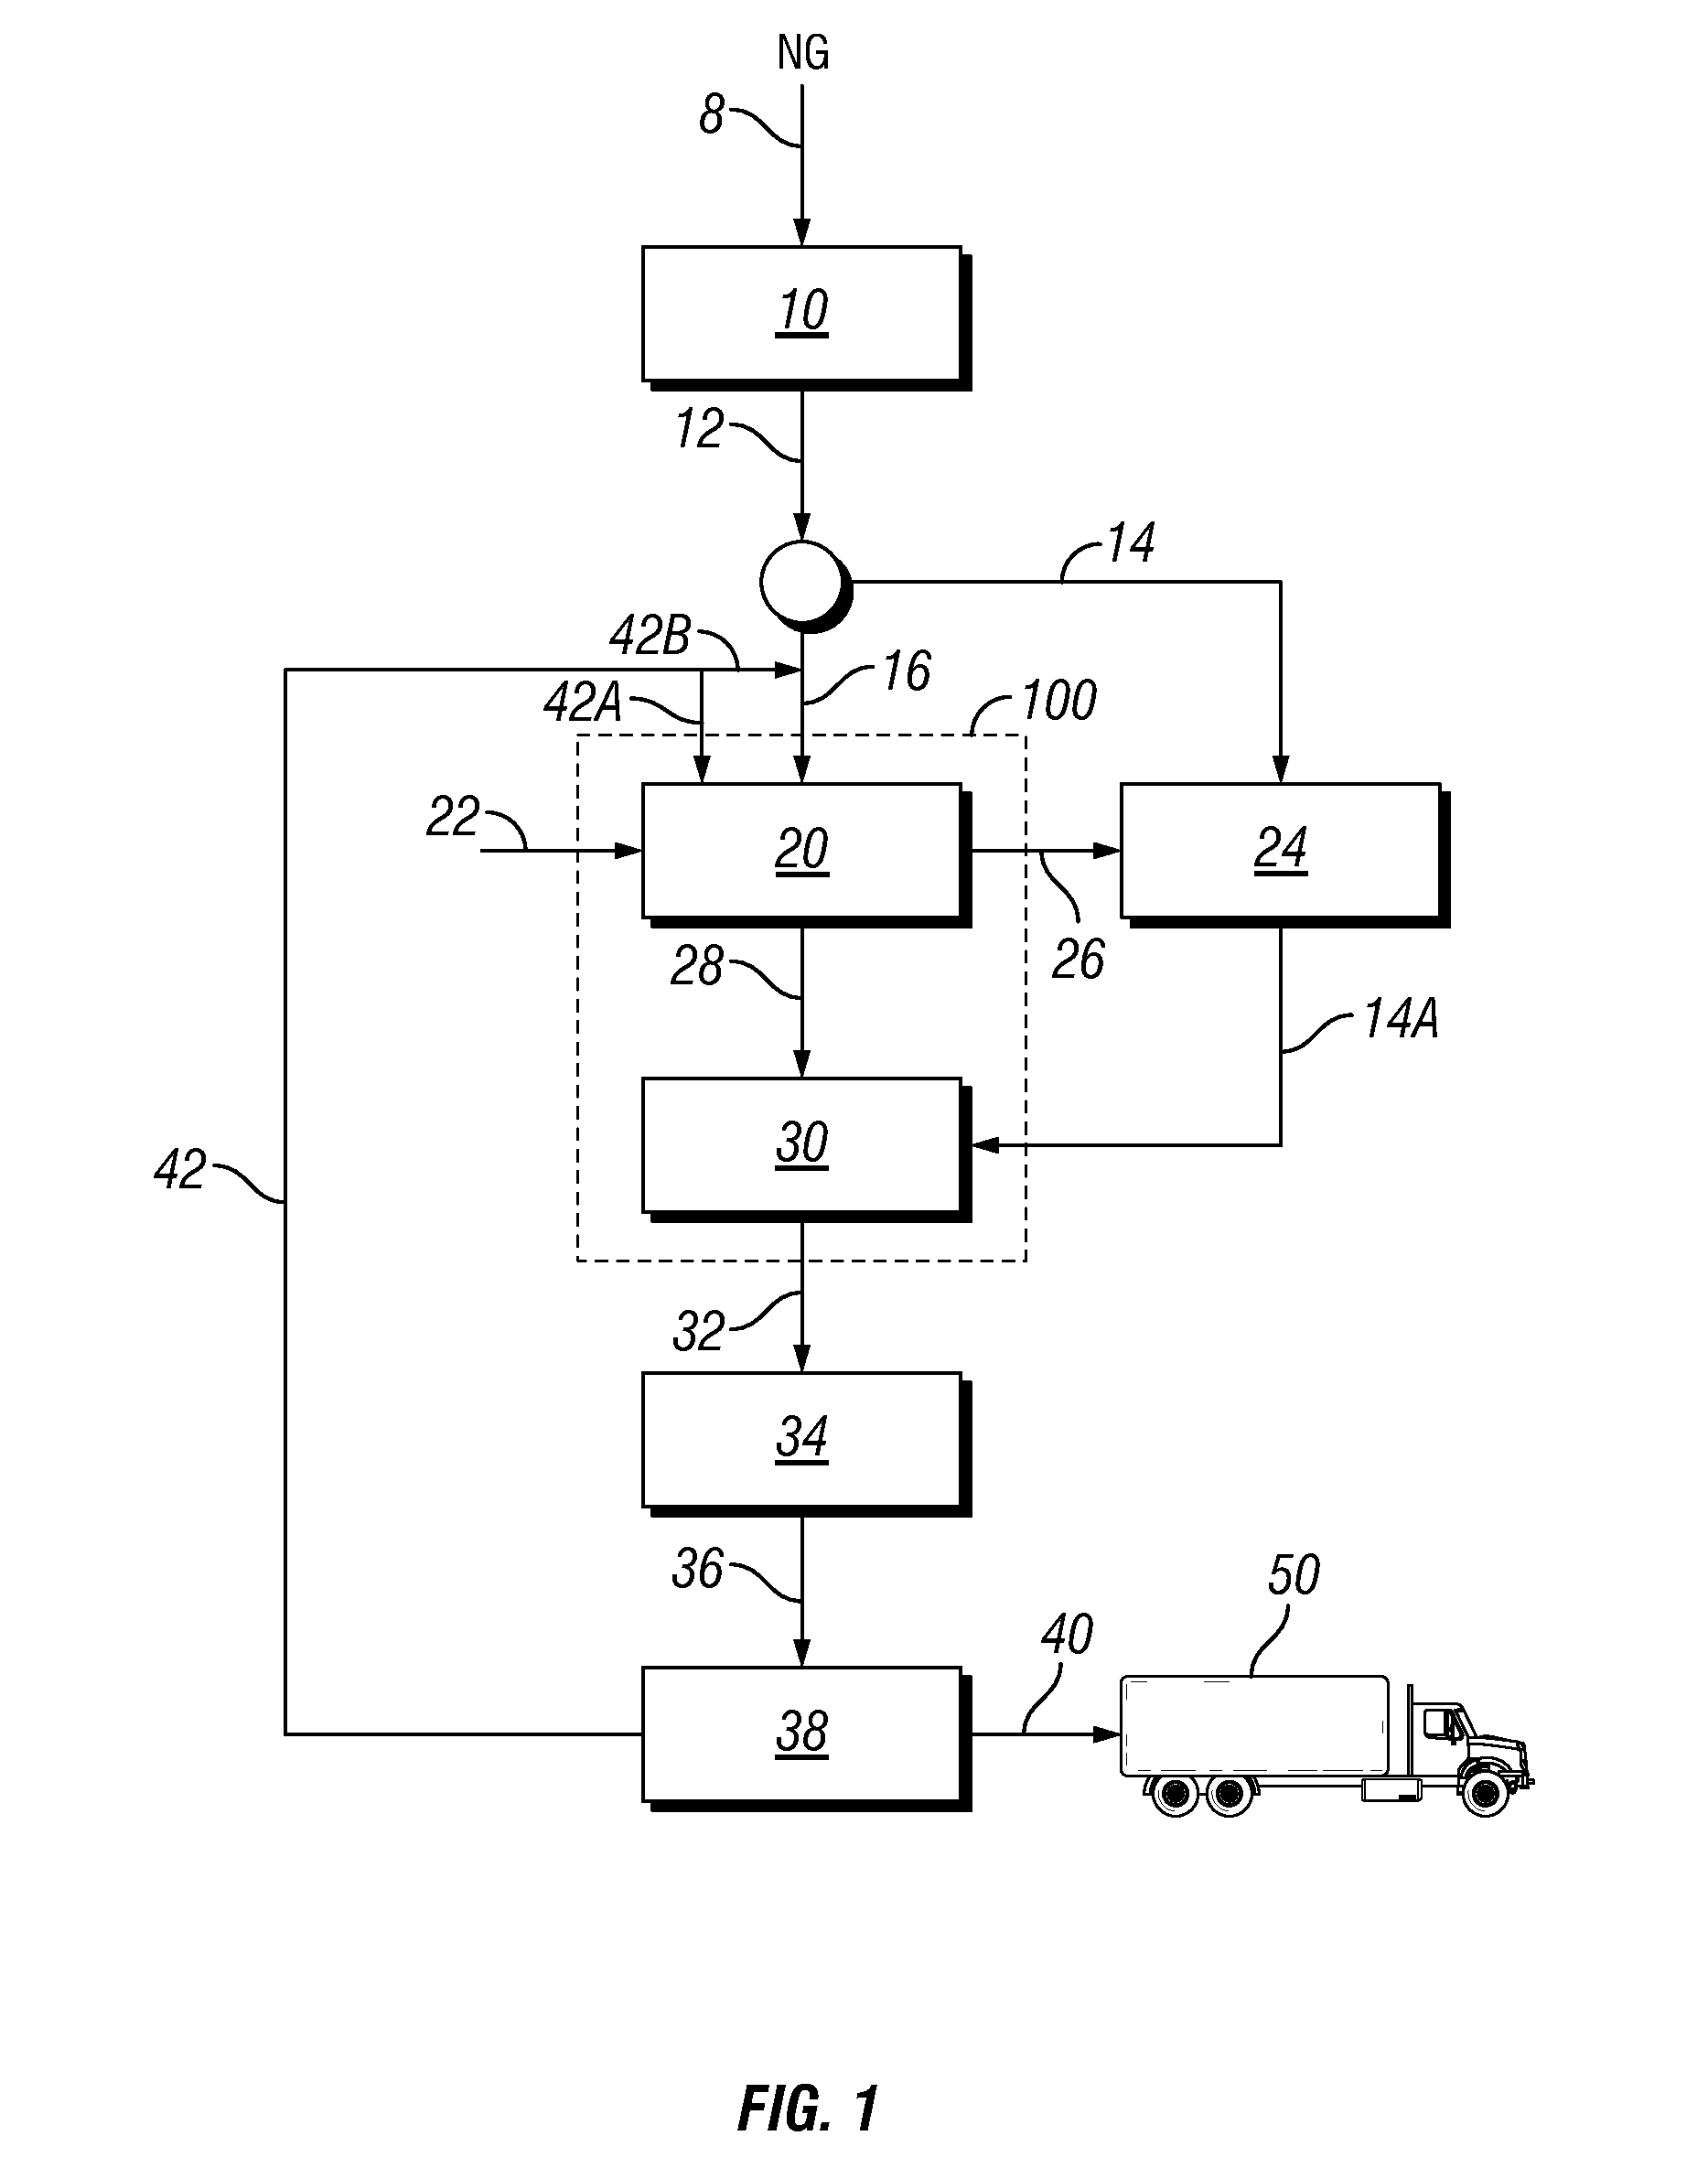 Process for the conversion of natural gas to acetylene and liquid fuels with externally derived hydrogen